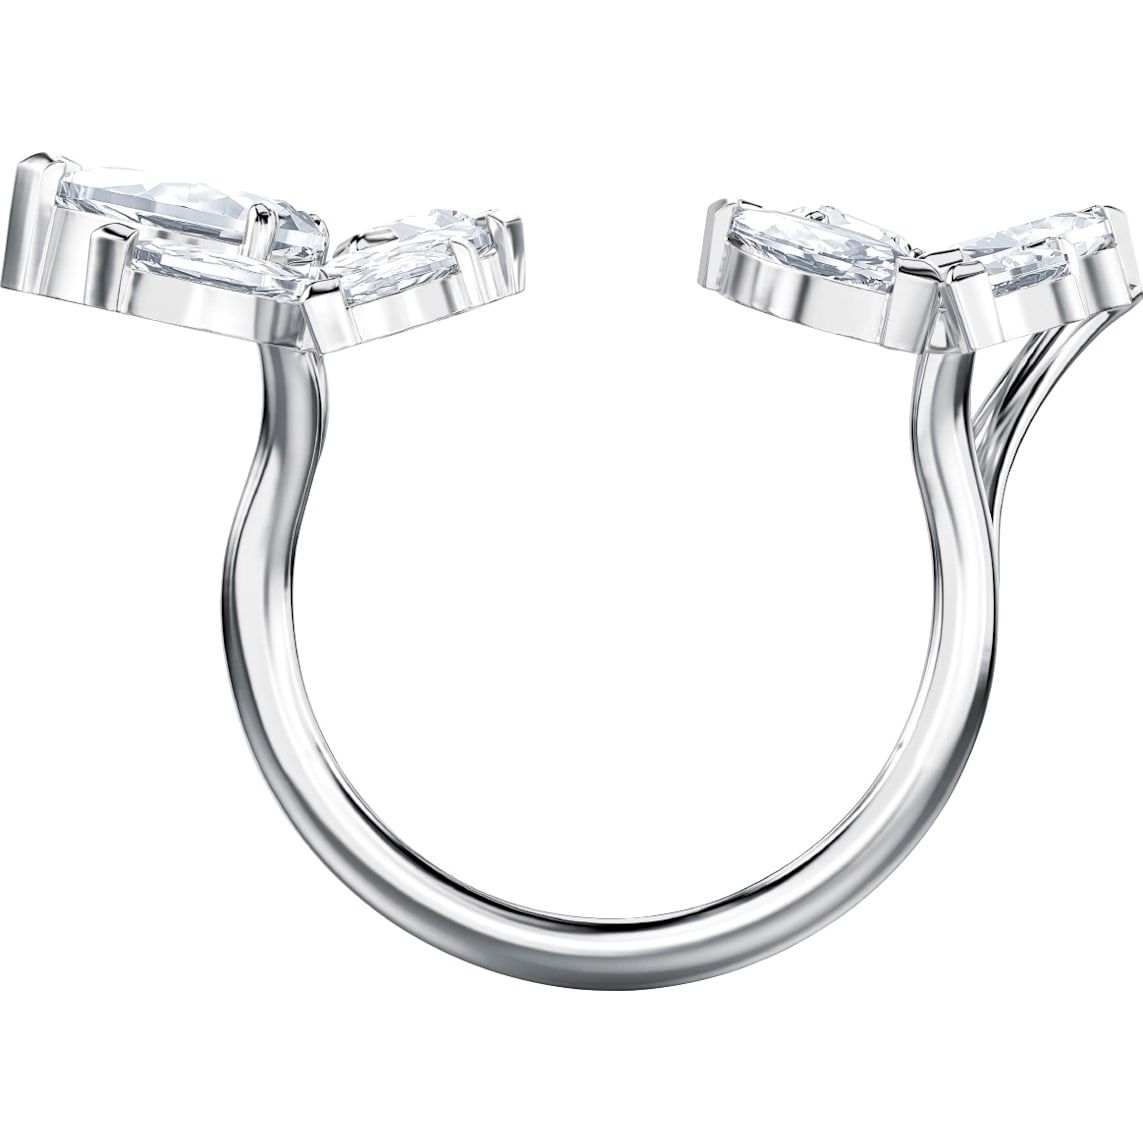 Louison Open Ring, White, Rhodium Plated With Regard To Best And Newest Sparkling Butterfly Open Rings (View 21 of 25)